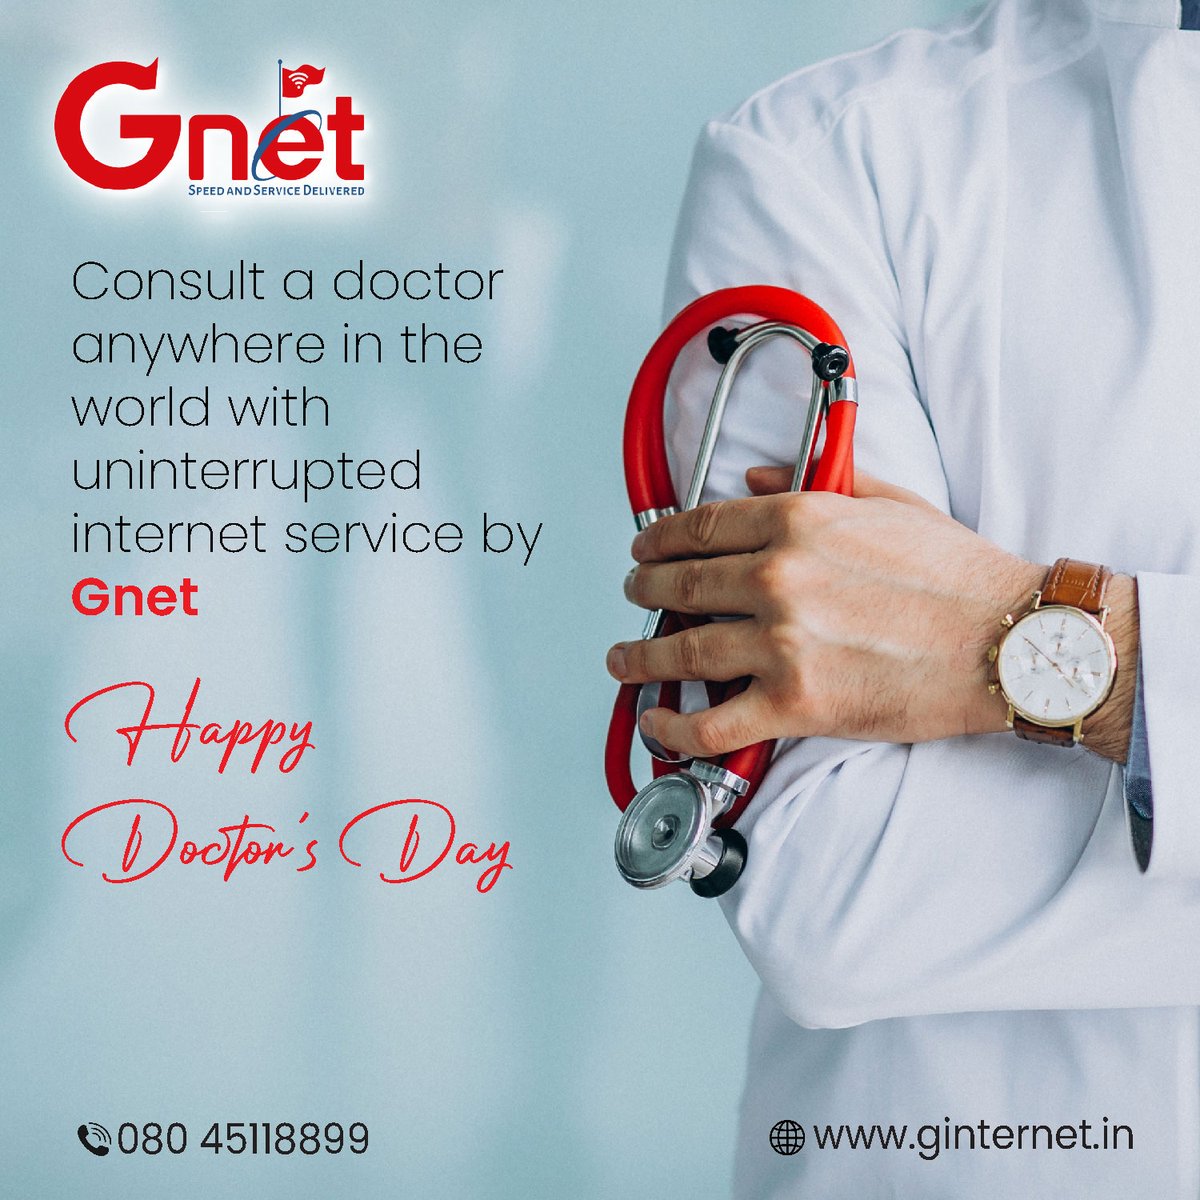 Access medical consultation from doctors worldwide with uninterrupted internet service by gnet

#fastestbroadband #fastestinternet #fastconnection #fastwificonnection
#bestbroadband #Bestinbangalore #Broadband #wifi #internet #NationalDoctorsday #internetservice